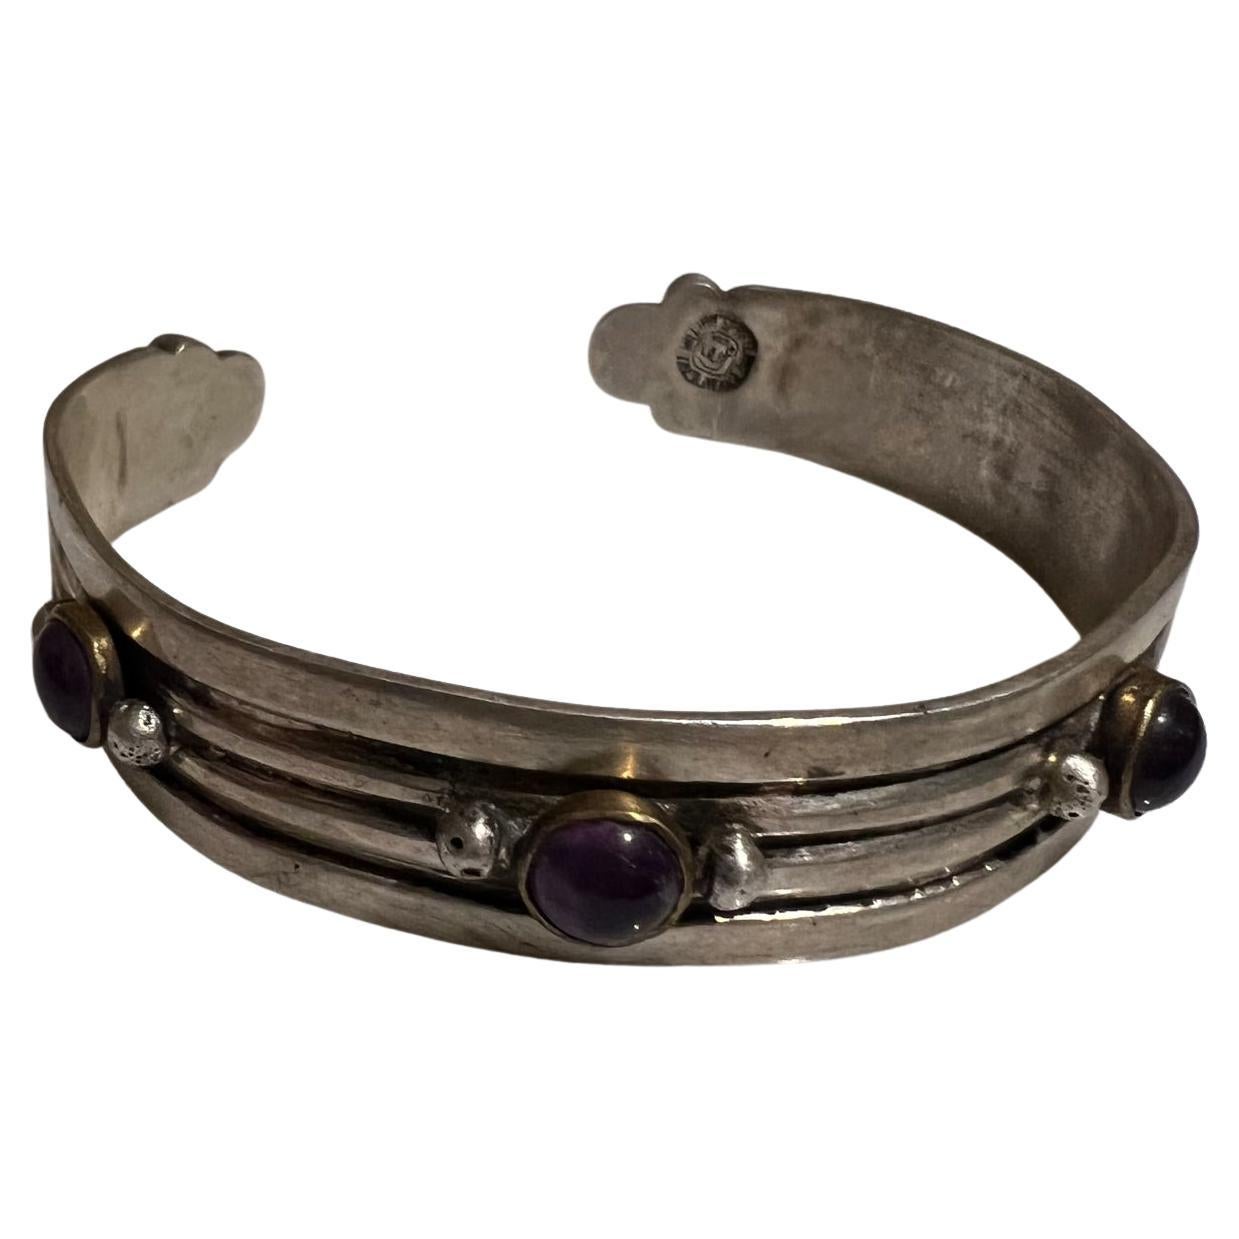 Rare Taxco Mexican Modern early Silver Artisan jewelry by famed William Spratling
Sterling silver slender cuff bracelet Jeweled Amethyst and brass
Maker Stamped William Spratling. Made in Mexico circa 1940s
Original vintage condition